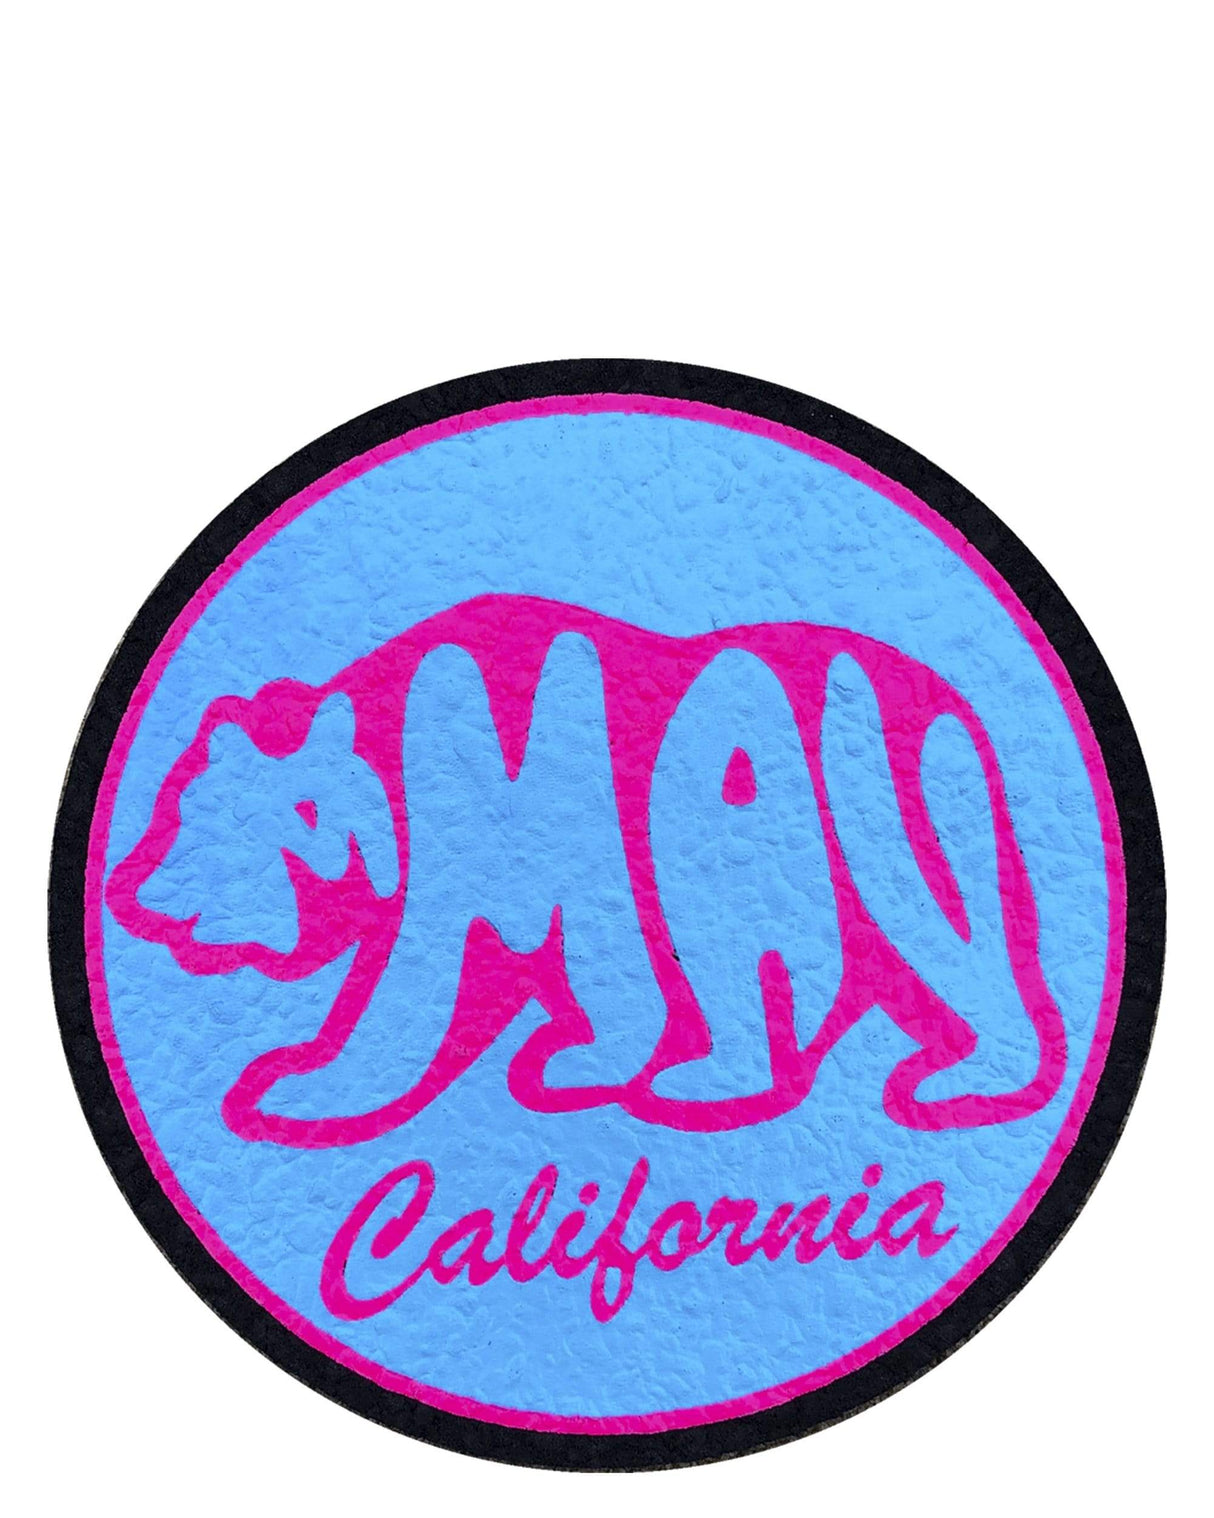 MAV Glass Moodmat Rubber Dab Mat with Cali Bear design in vibrant colors, perfect for dab rig setup